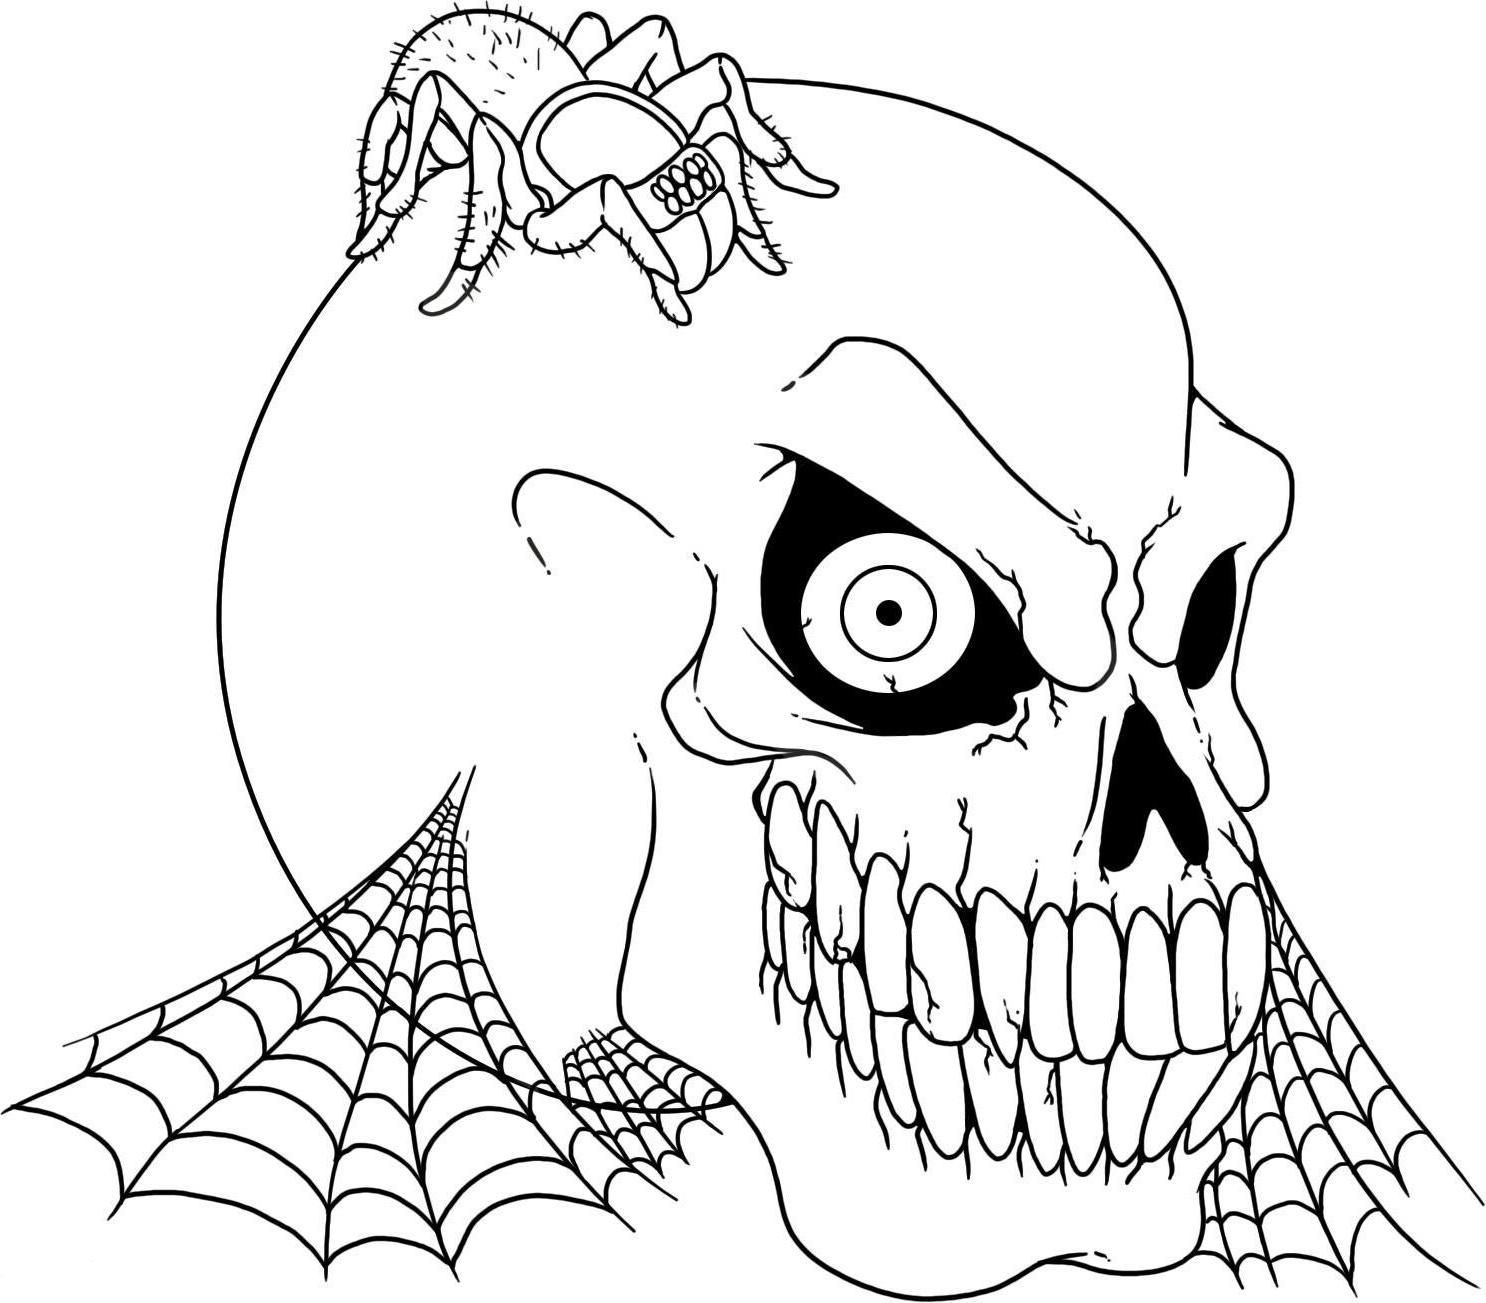 scary halloween coloring pages Large Image. Spider coloring page, Skull coloring pages, Halloween coloring pages